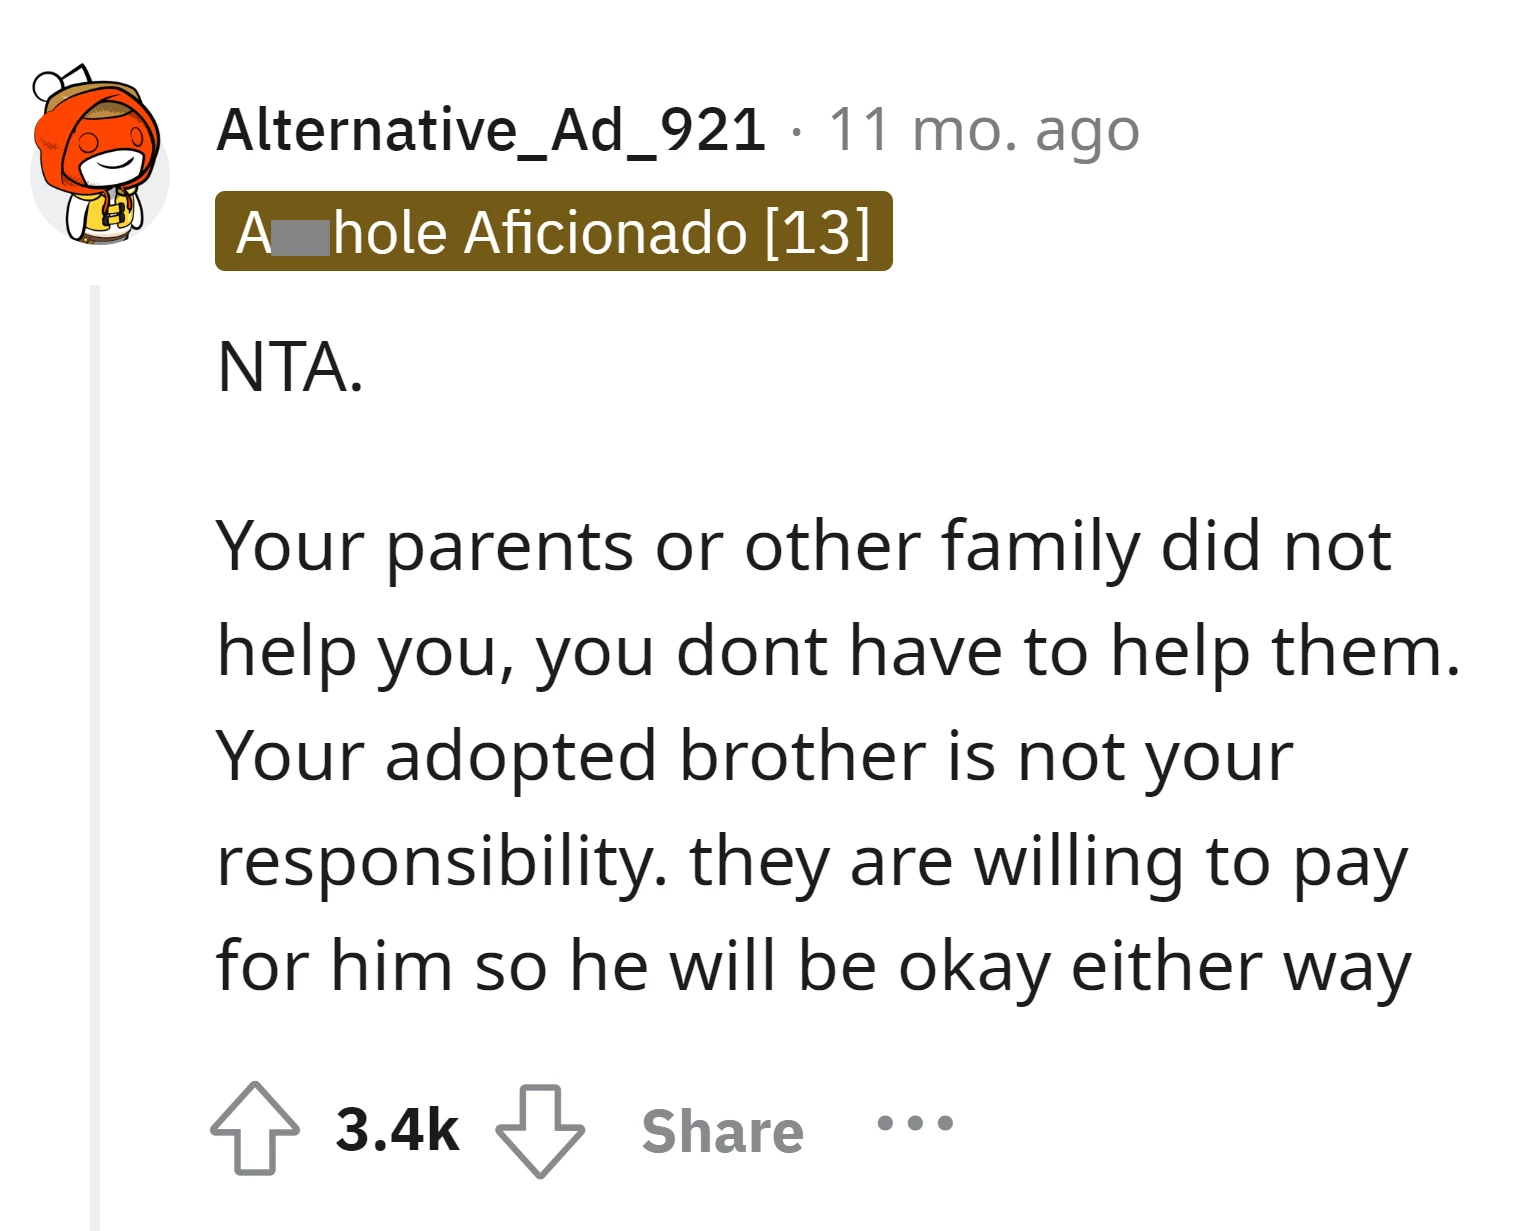 Since the family didn't support the OP, he is not obligated to help